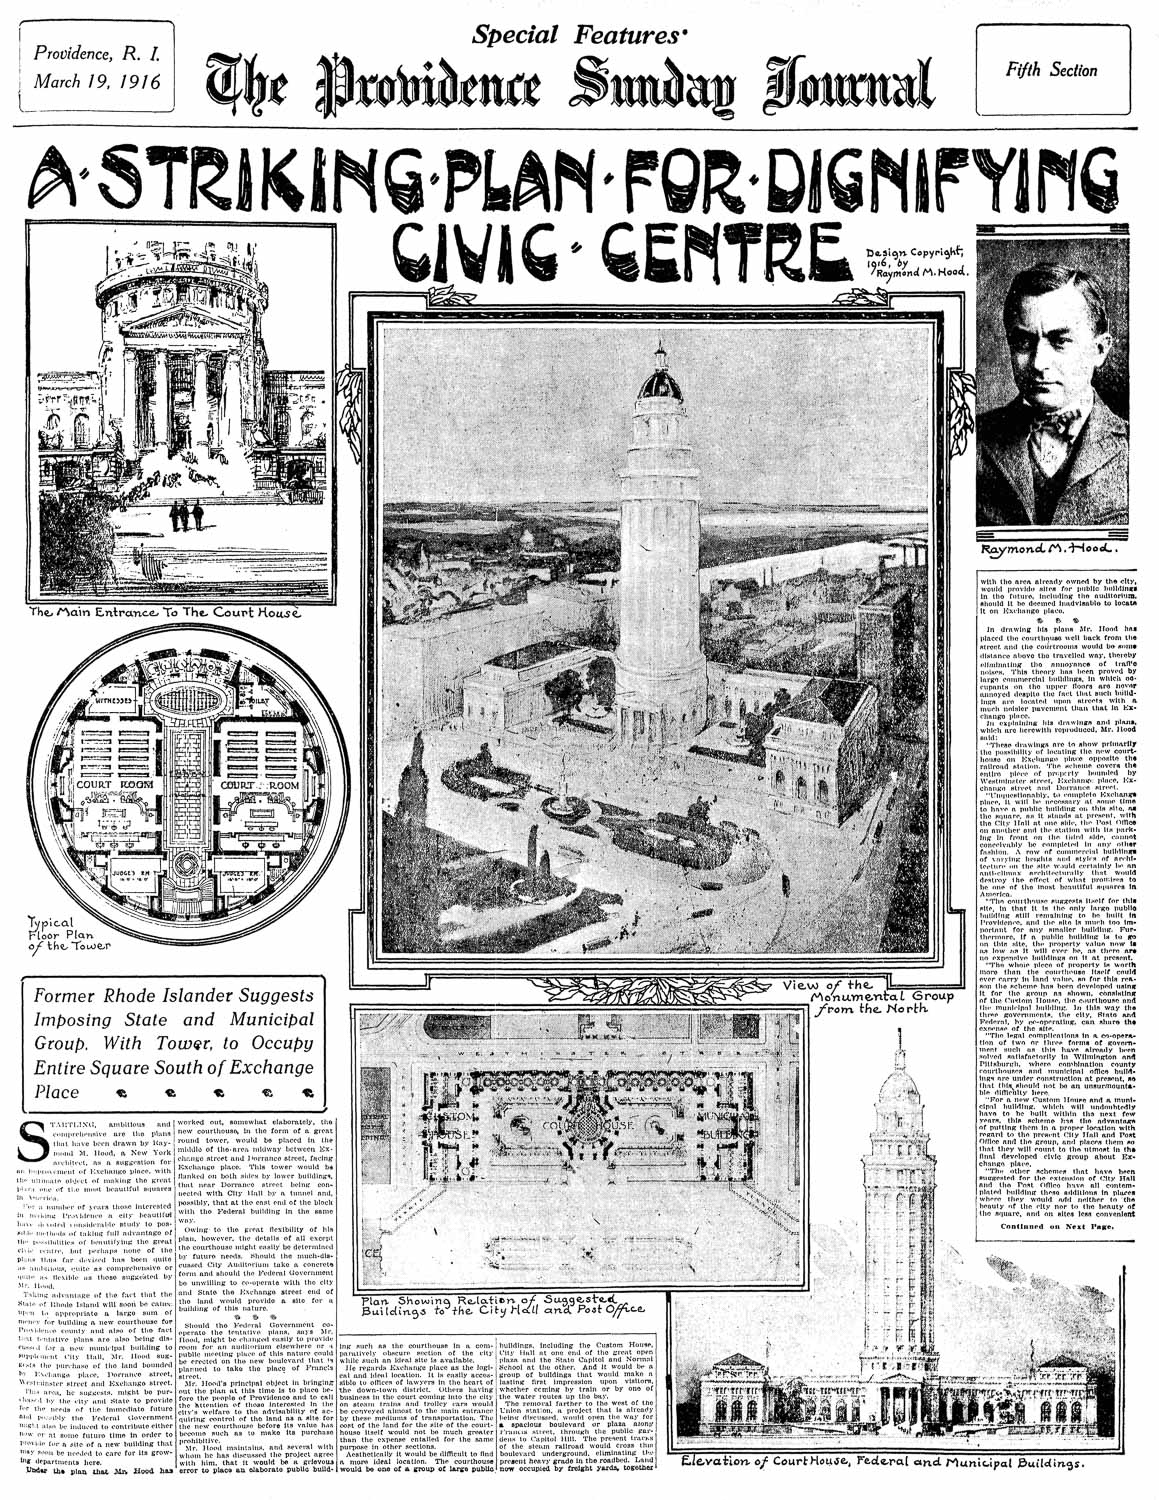 A full-page newspaper spread. A large central image shows a low, U-shaped building with a tower rising from within the U. The tower is rounded and is topped by a dome. Surrounding this are smaller images and the text of the newspaper article. Clockwise, from the top right are: a portrait photograph of Raymond hood; an elevation drawing of the tower complex housing the Courthouse, Federal, and Municipal offices; a rectangular floor plan of the main level of the entire structure; a round floor plan of one level of the tower; and a detail view of the main entrance of the courthouse at the base of the central tower. The central headline reads: A striking plan for dignifying City Center.